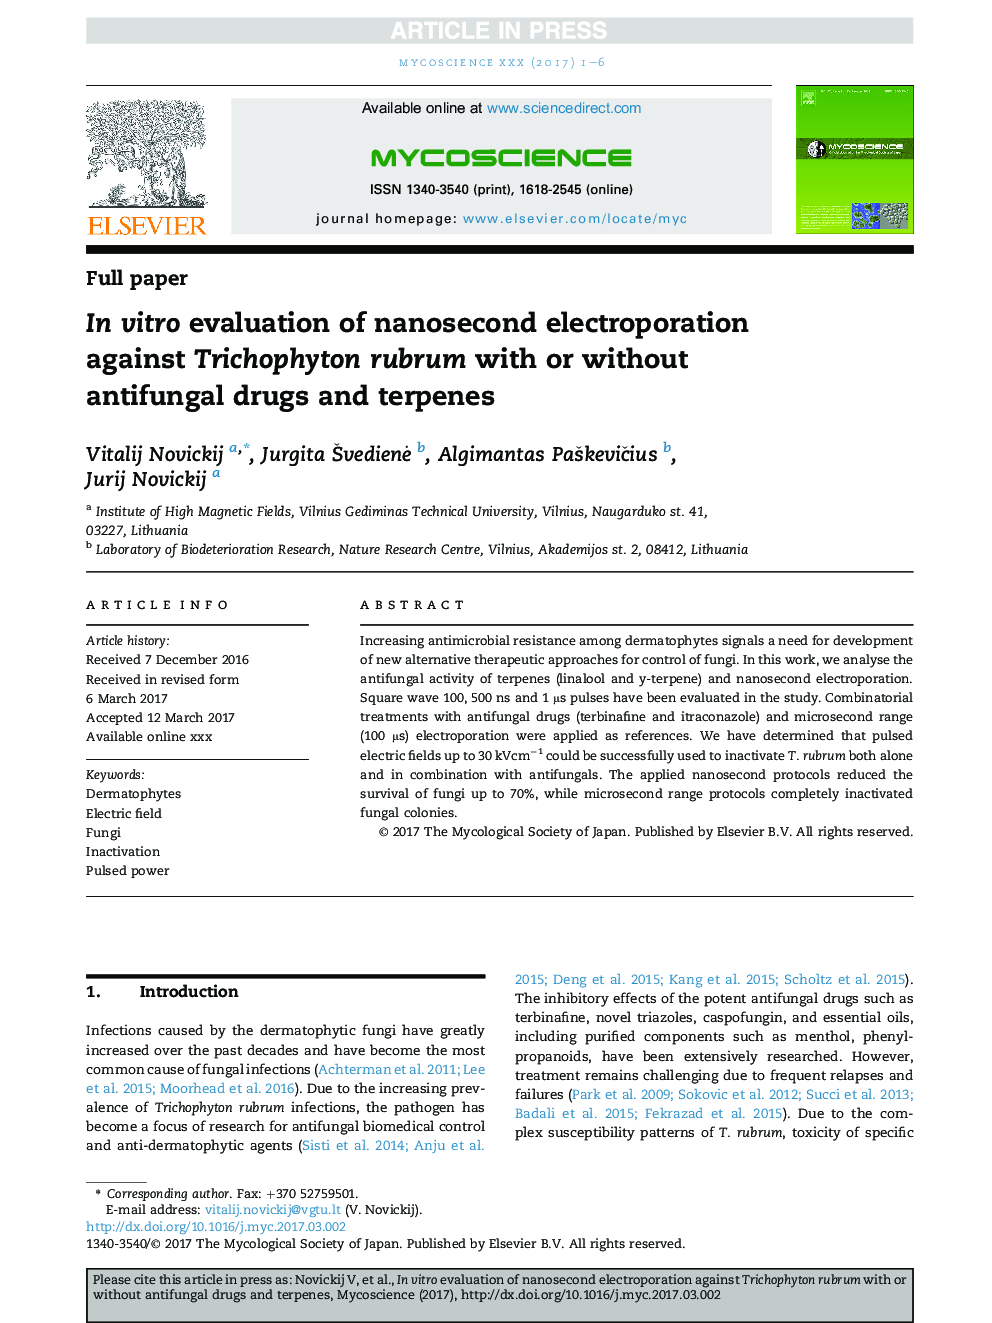 InÂ vitro evaluation of nanosecond electroporation against Trichophyton rubrum with or without antifungal drugs and terpenes